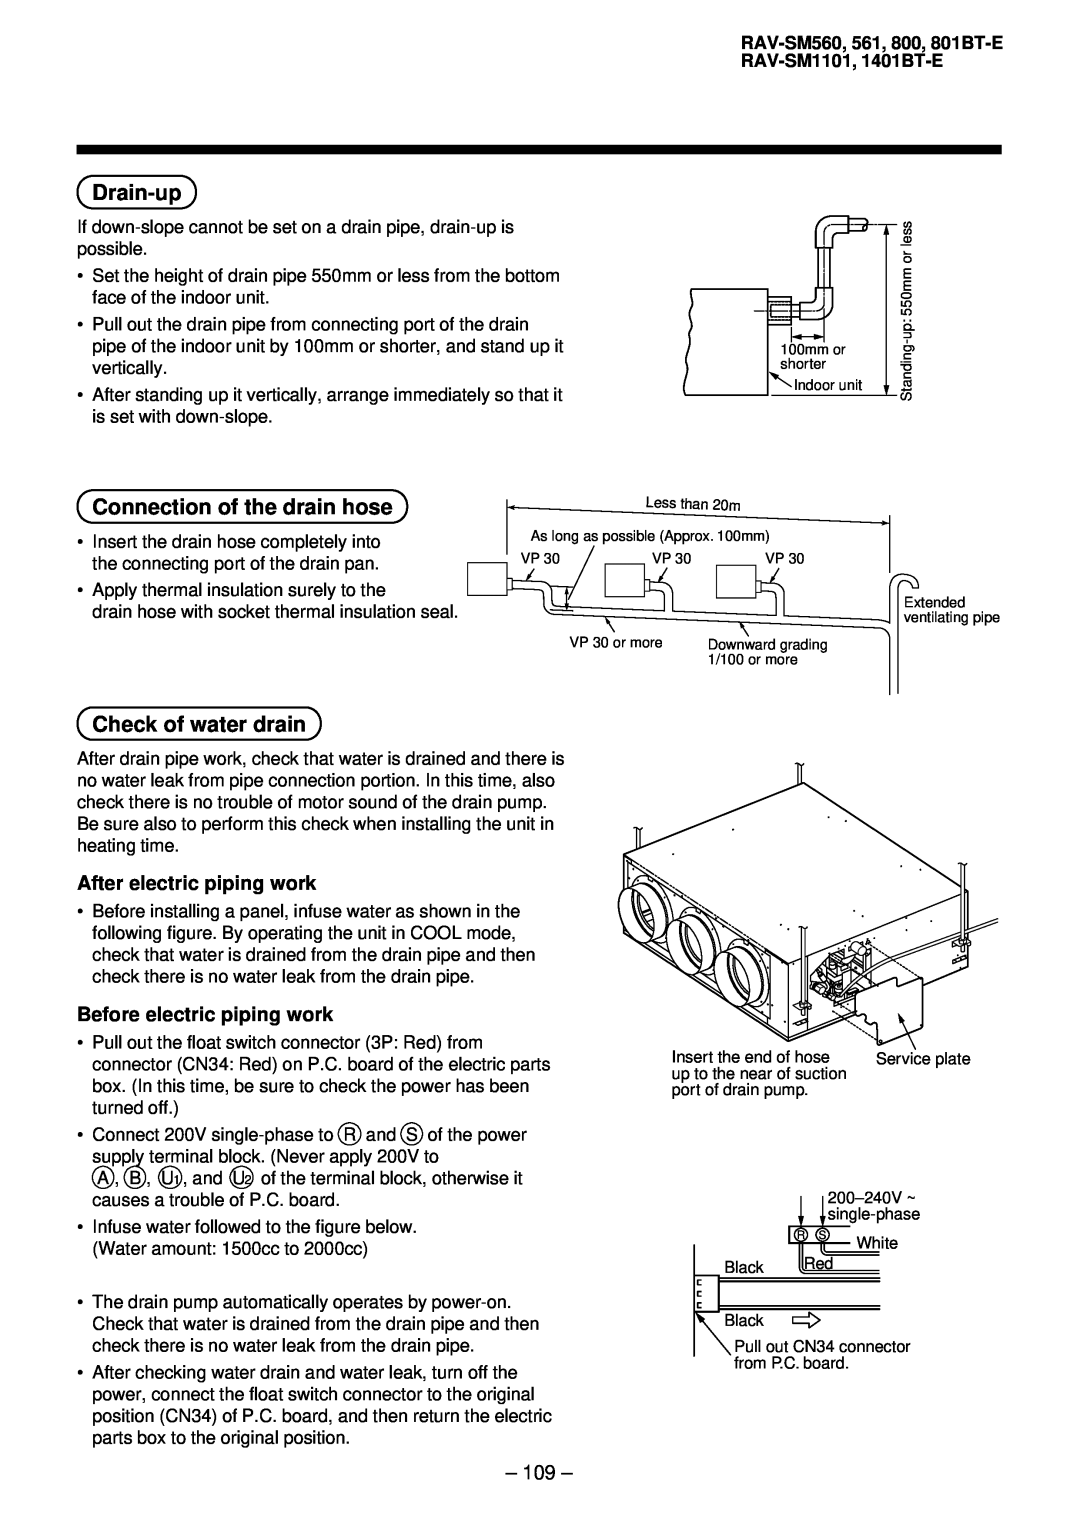 Balcar R410A service manual Drain-up, Connection of the drain hose, Check of water drain, After electric piping work, 109 